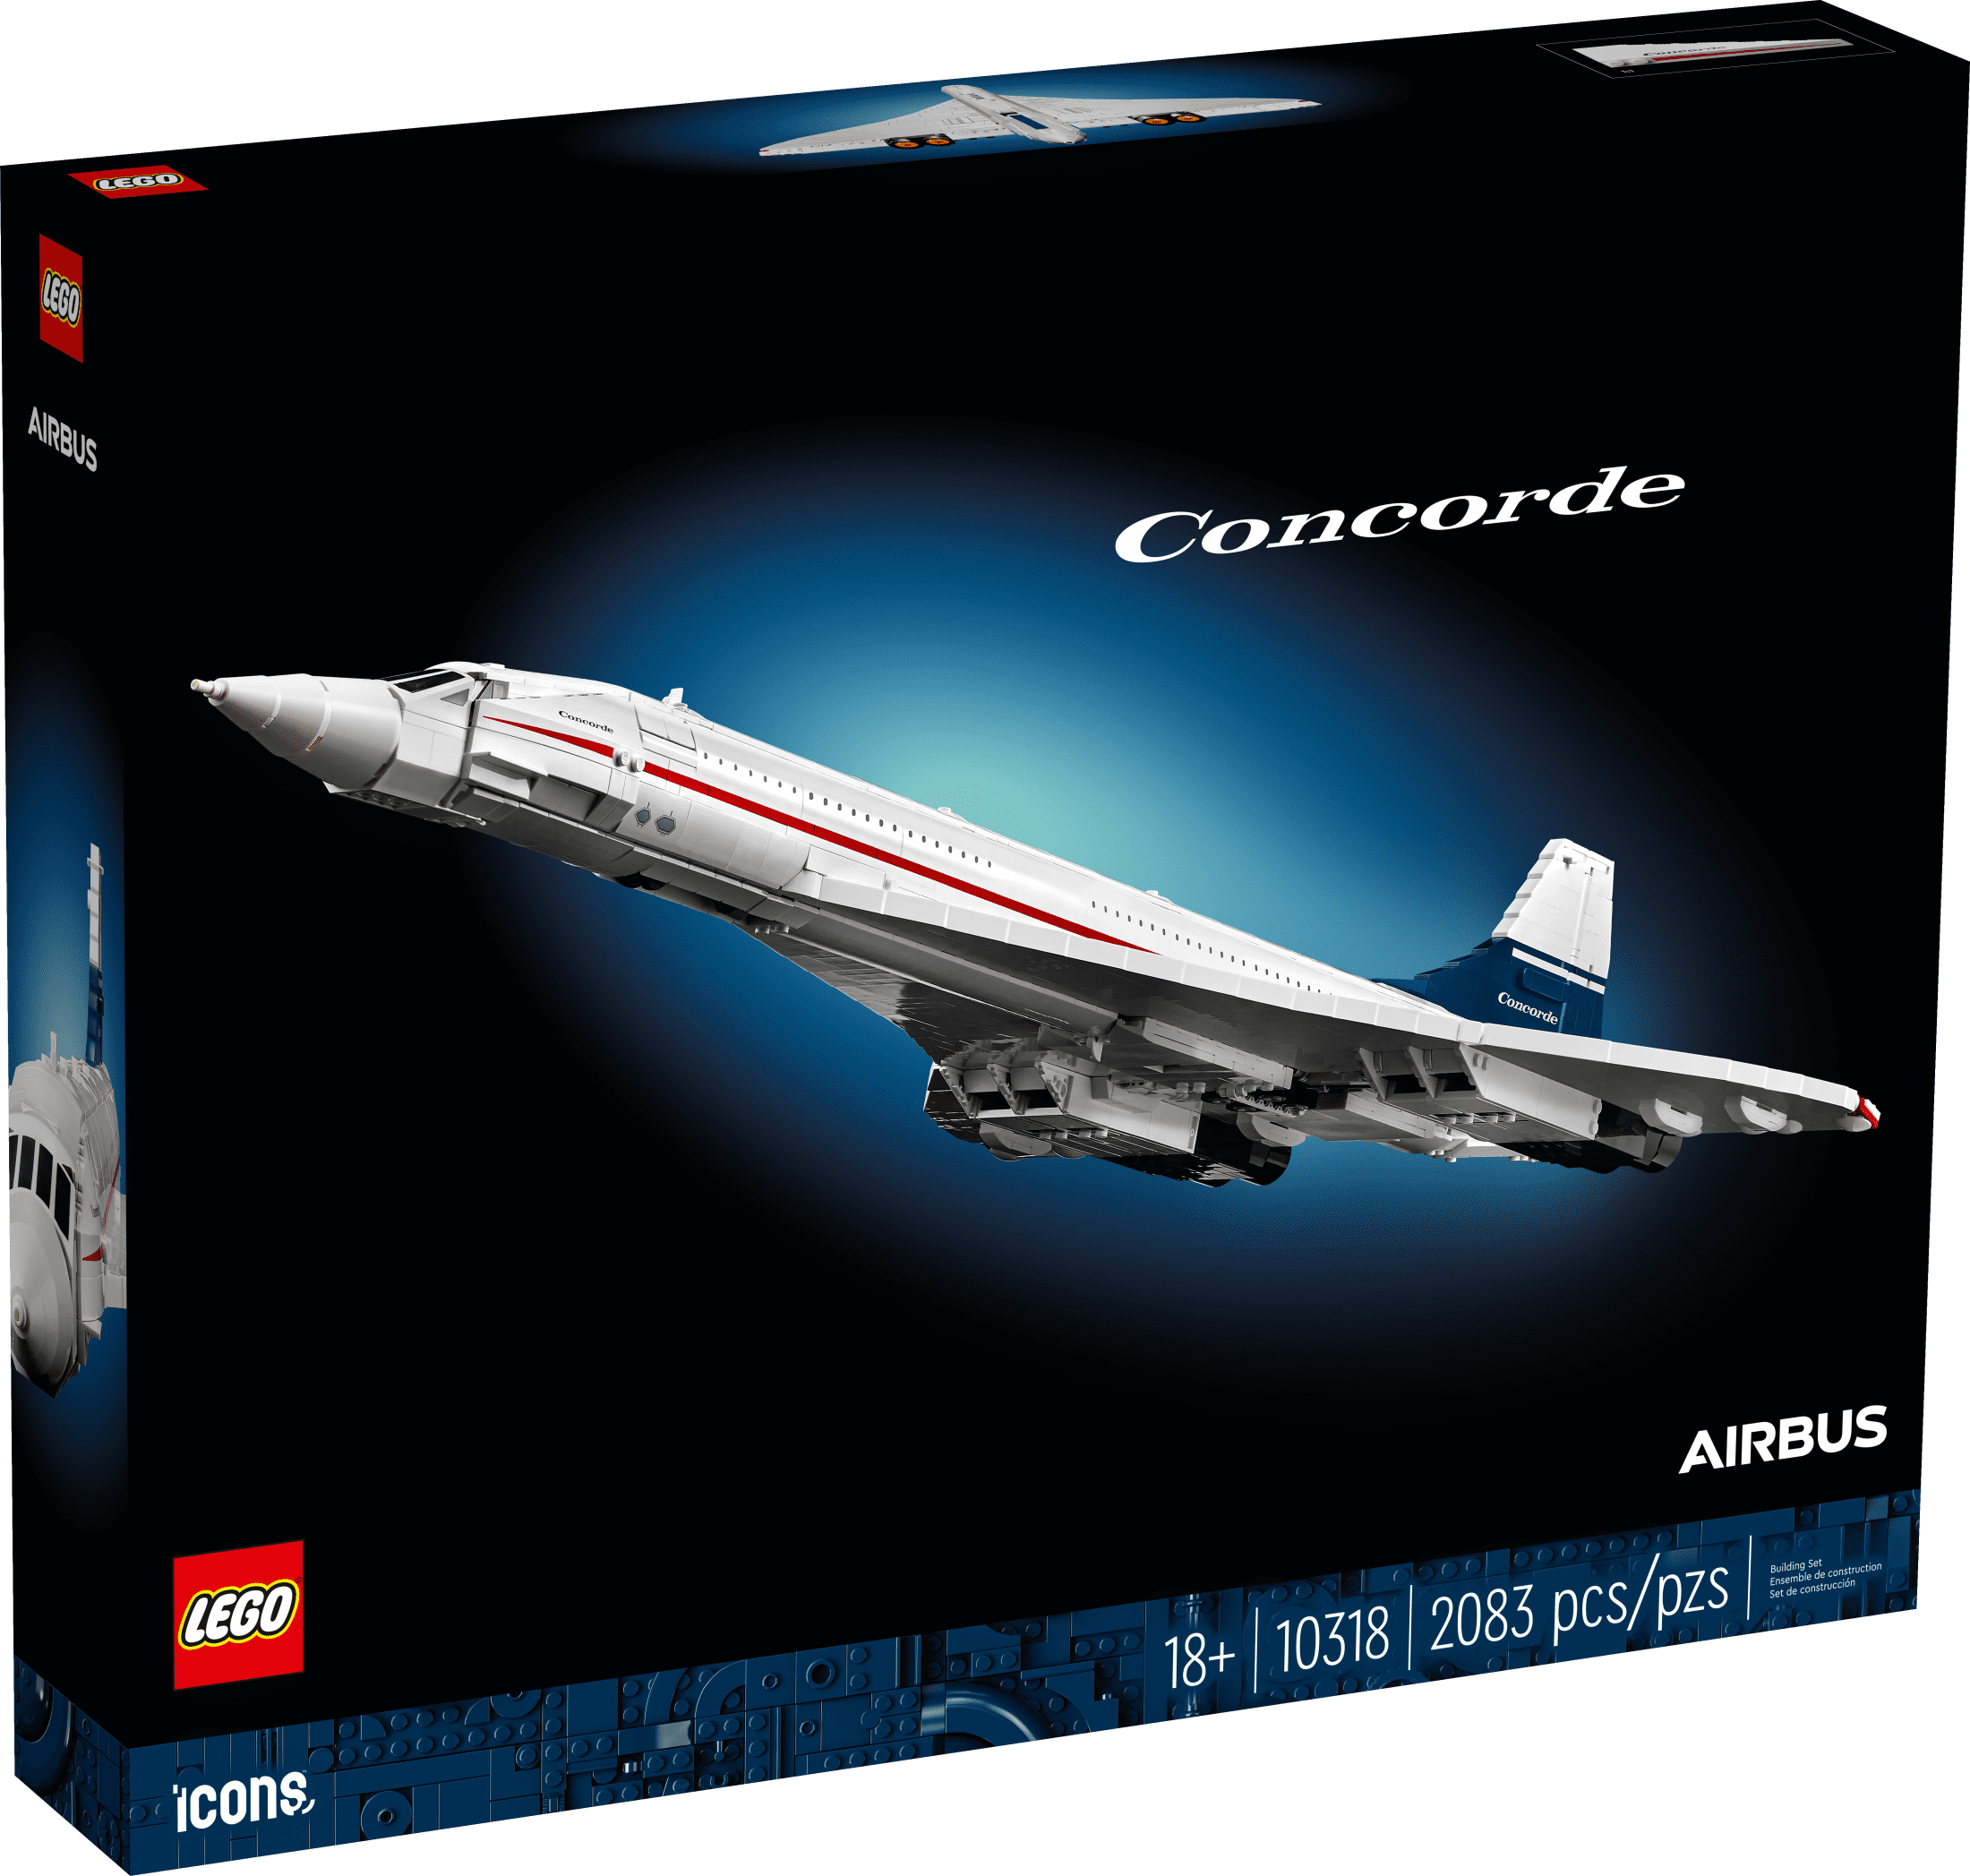 LEGO Icons Concorde Model Aircraft, Gift for Adults, Build a Replica Model  of the World's Most Famous Supersonic Commercial Passenger Plane with  Authentic Details and Functional Pieces, 10318 